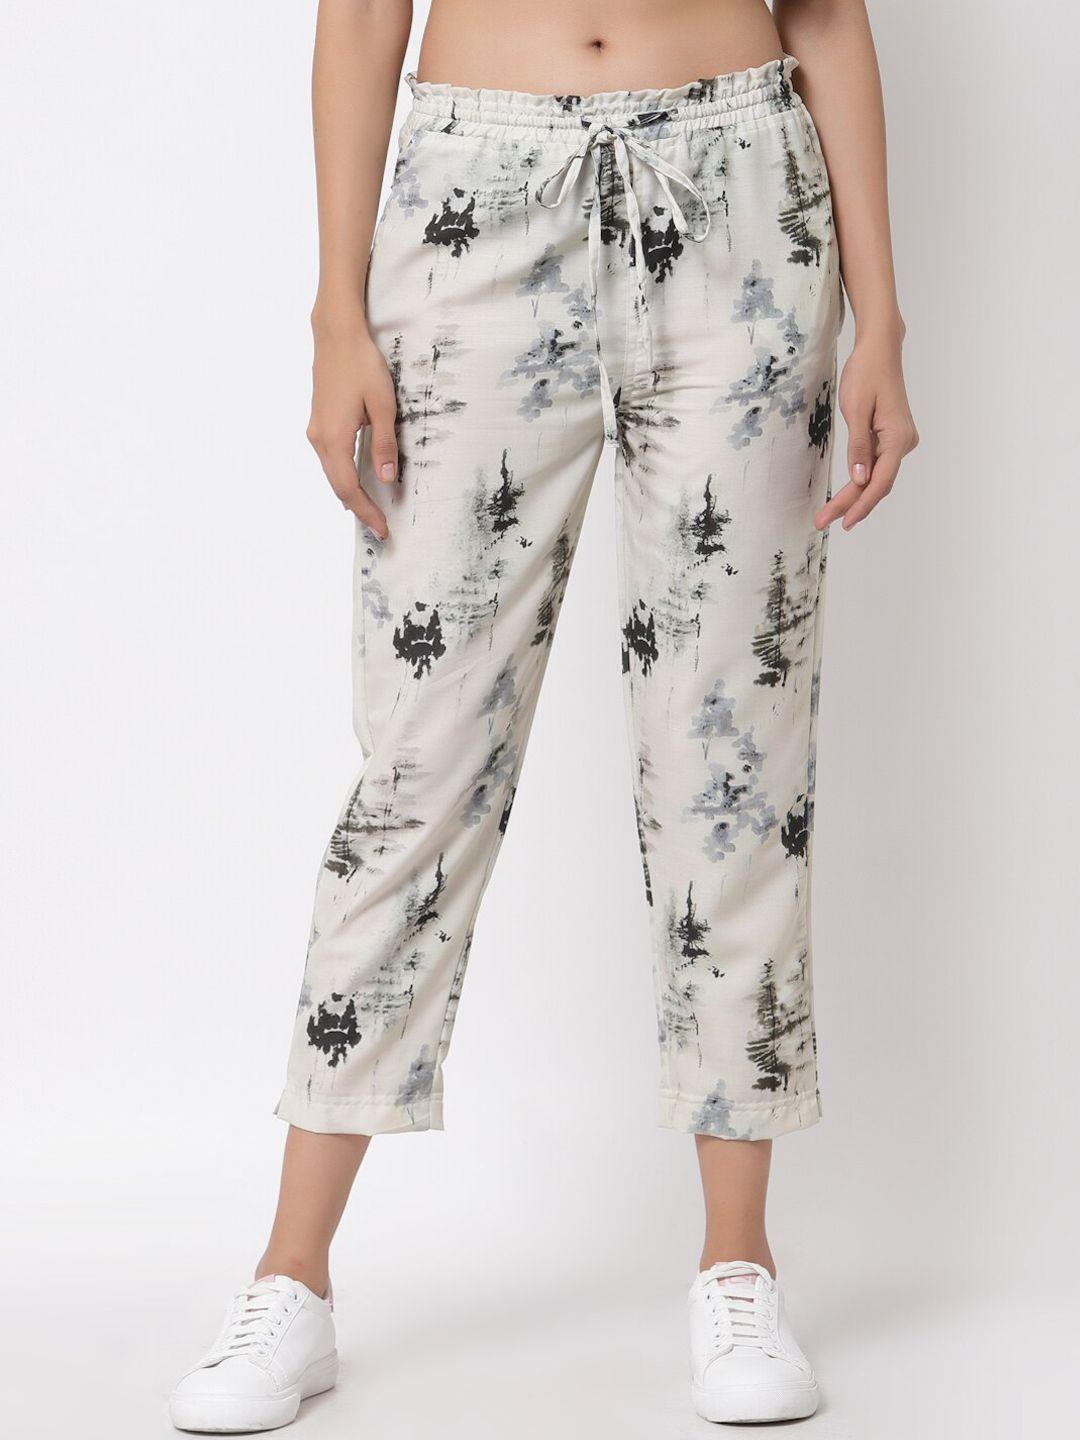 j style women cream-coloured printed joggers trousers